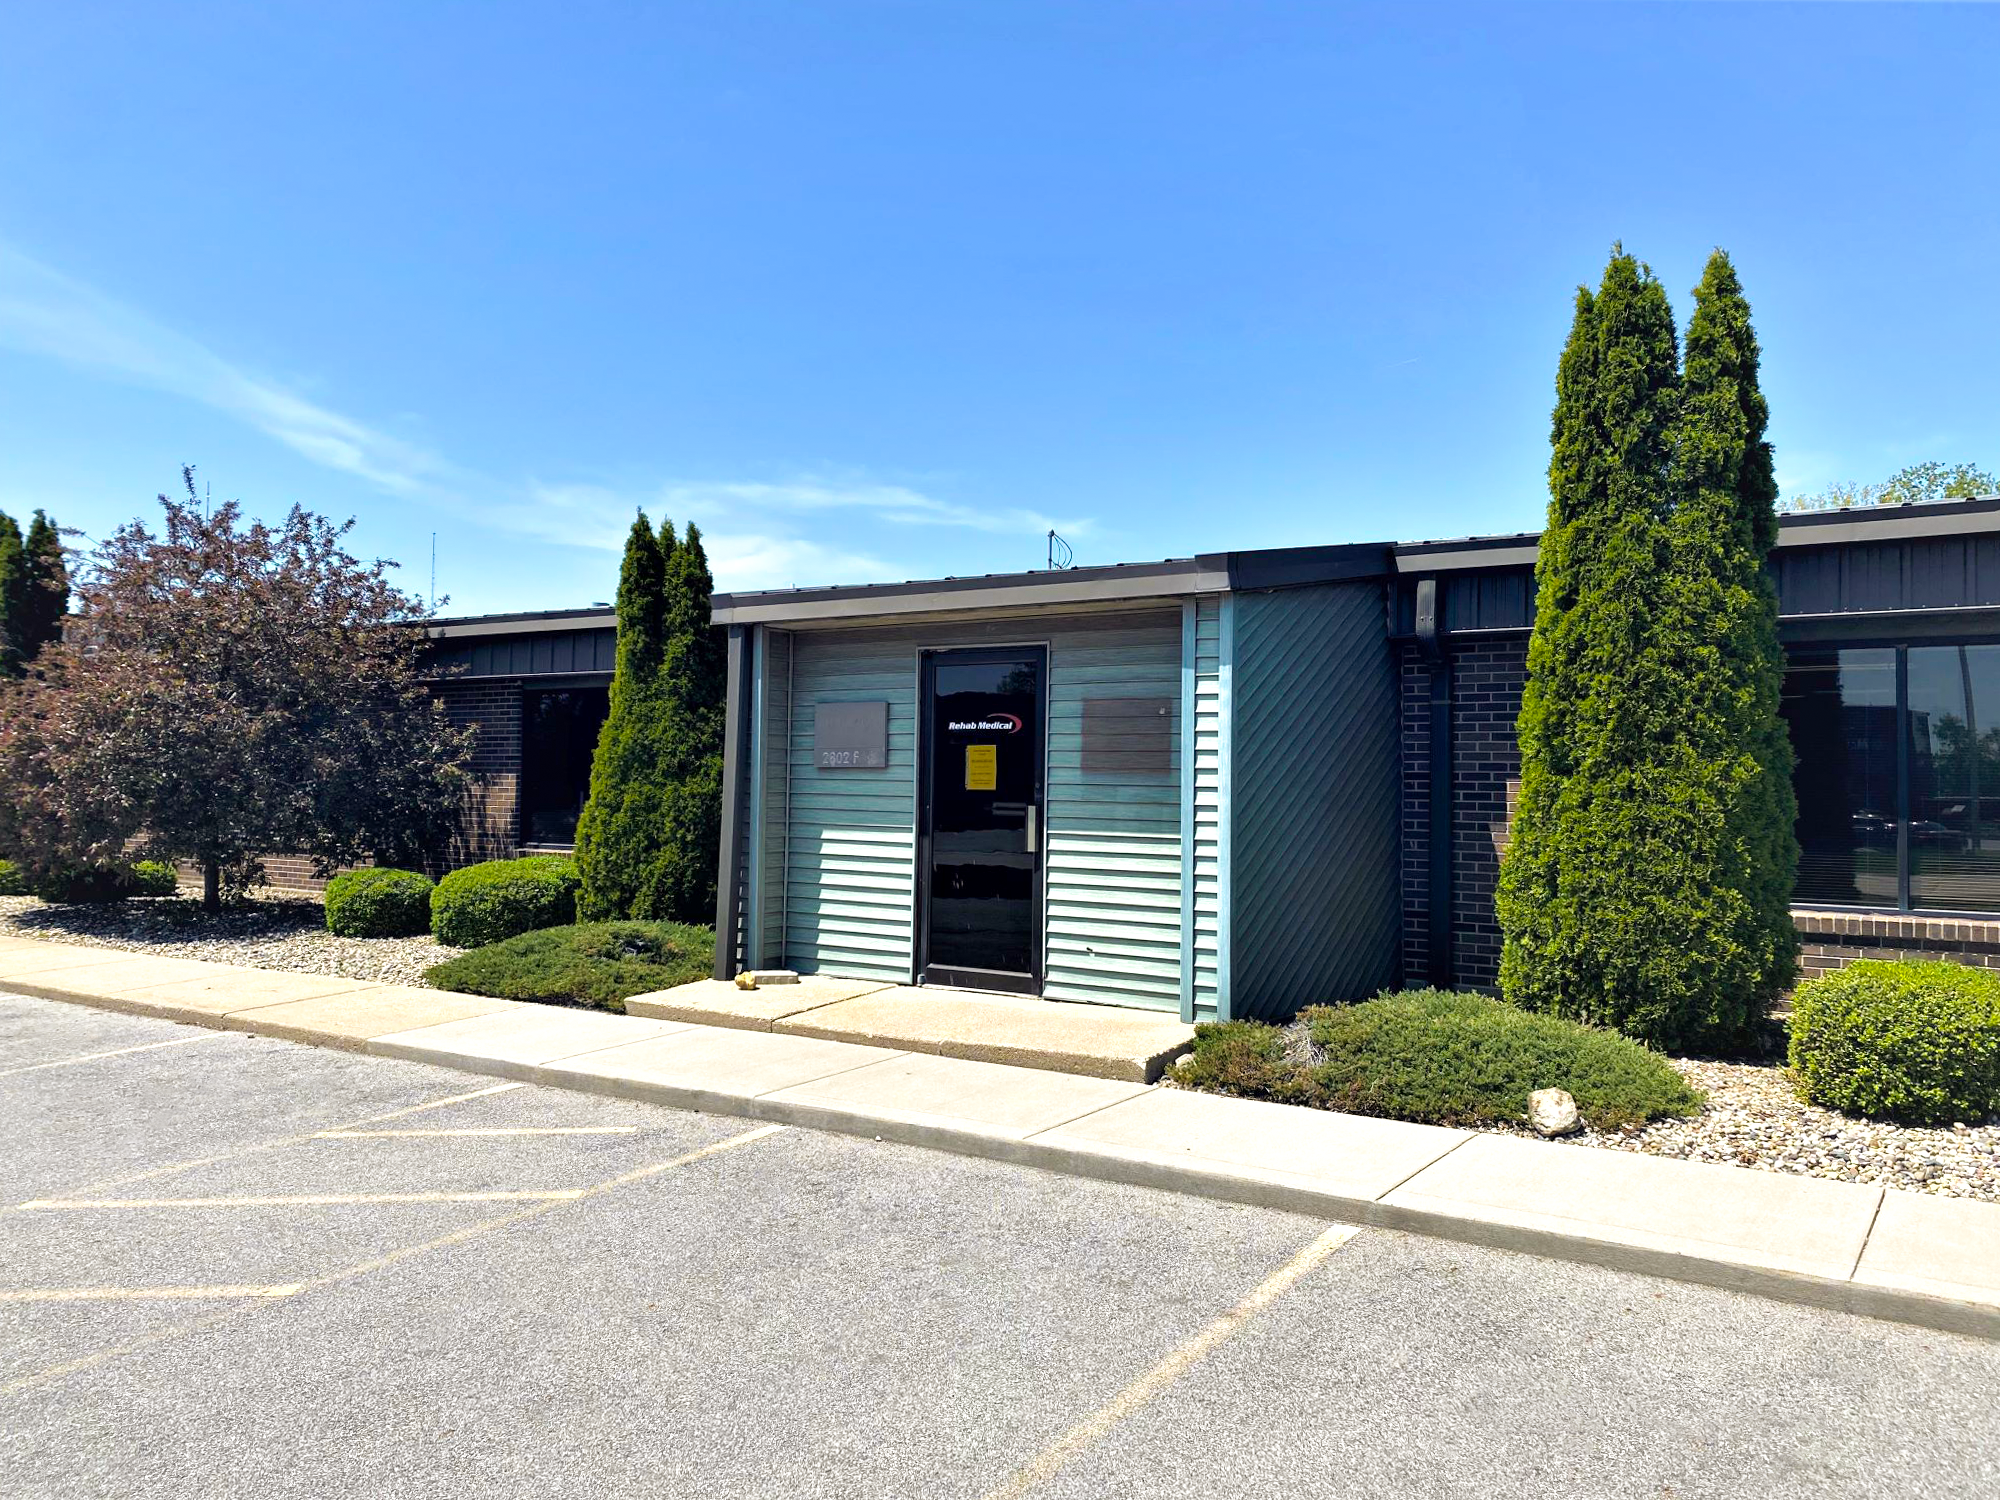 Sturges Property Group - Congressional Parkway Flex For Lease Industrial Space